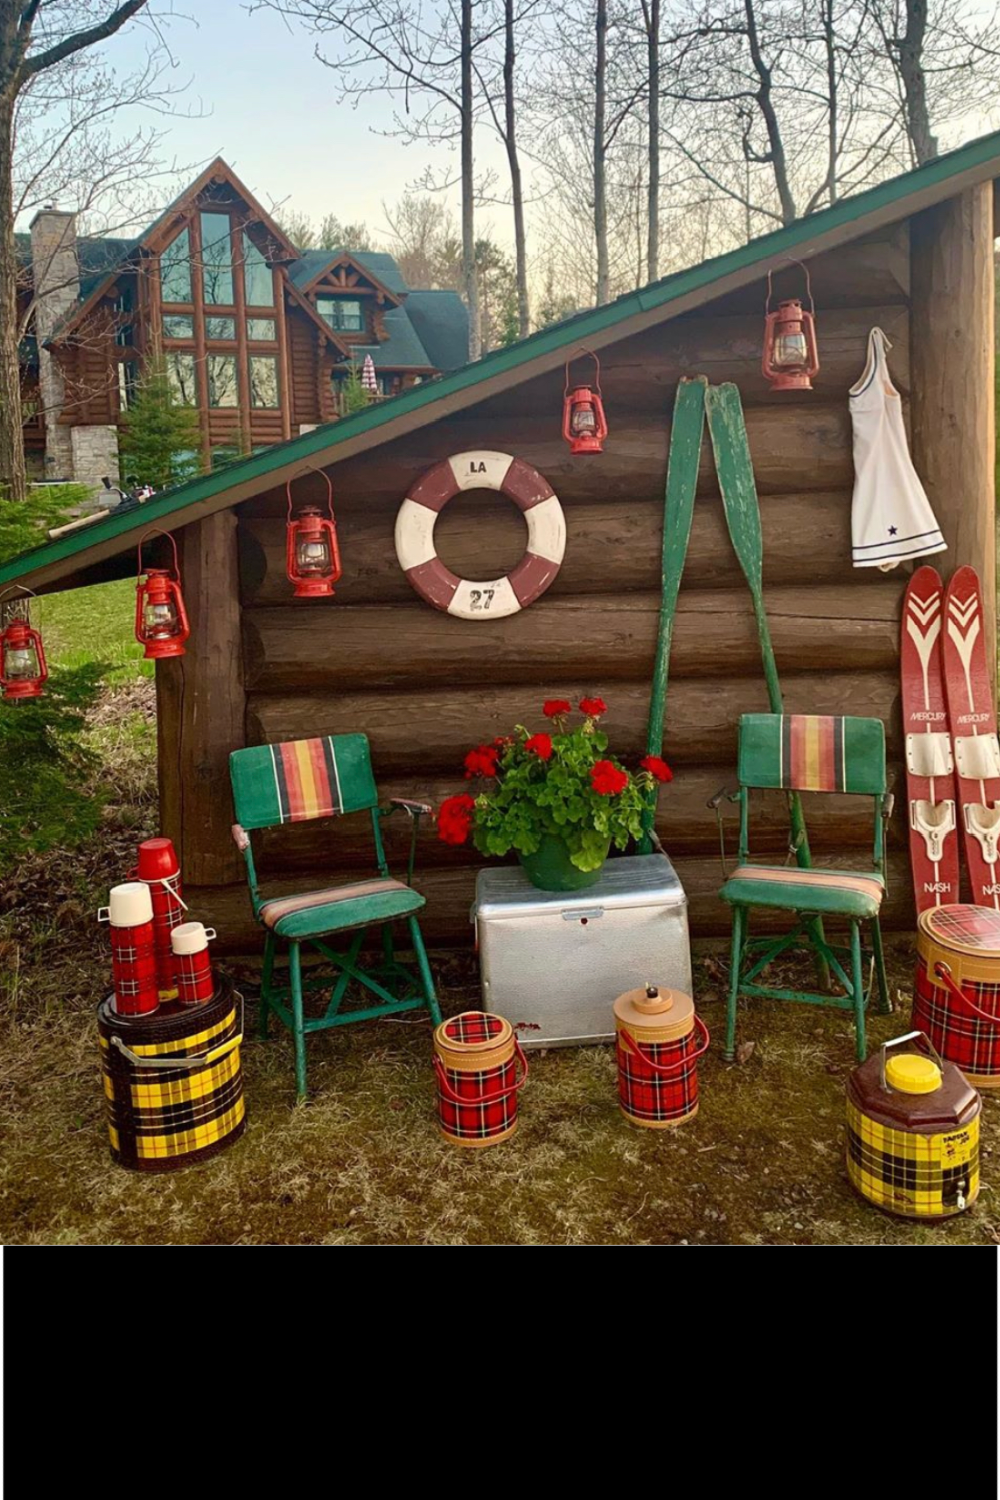 Cabin and boat house with vintage decor